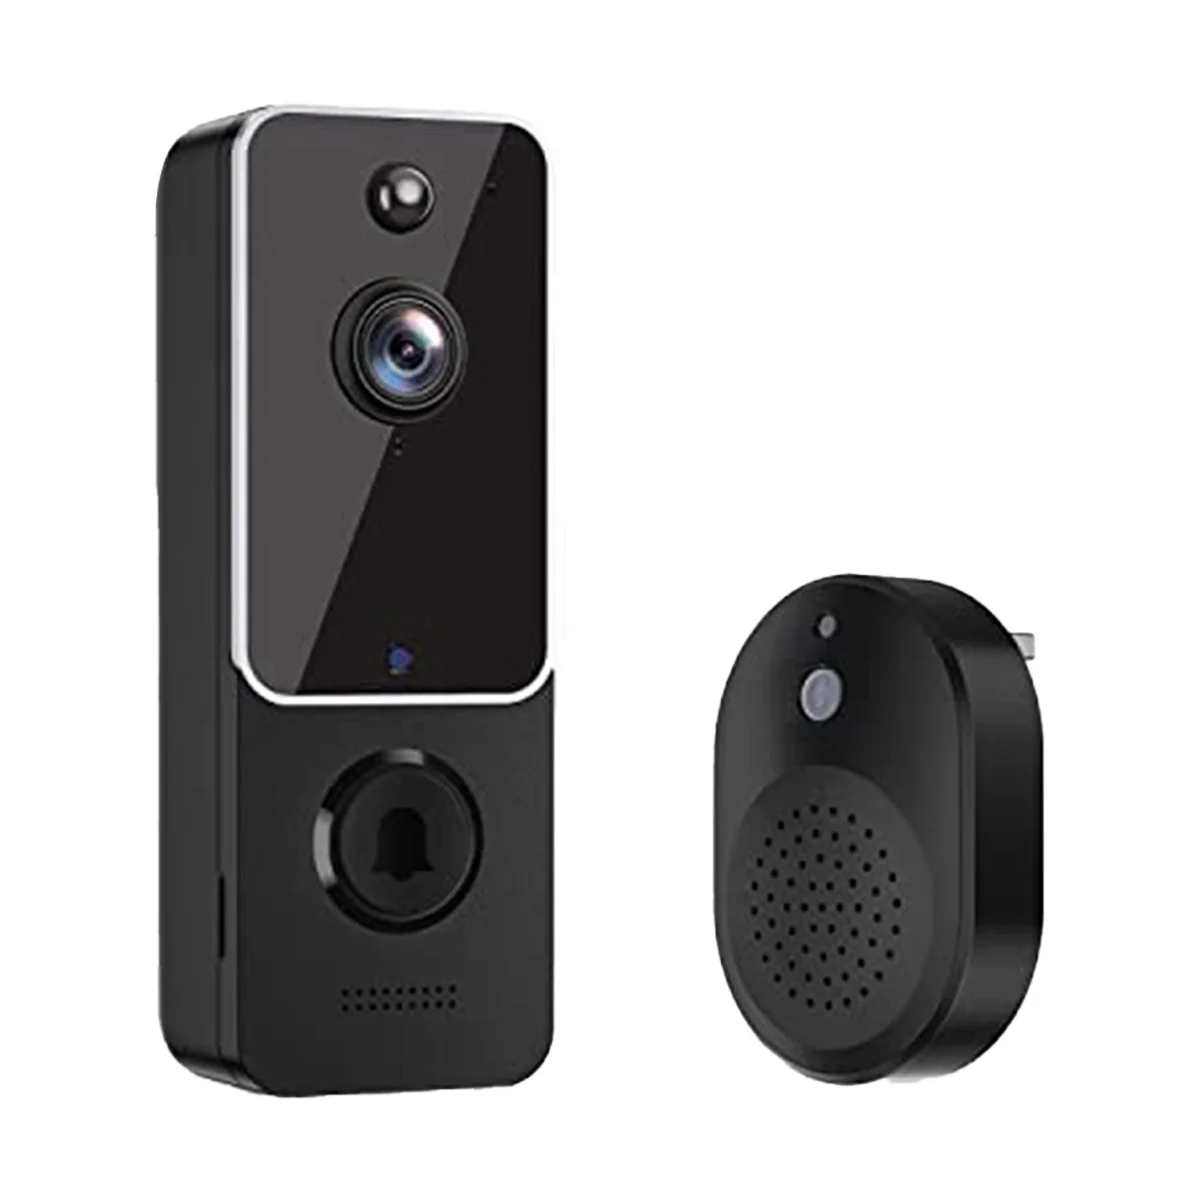 

Wireless Doorbell Camera, Smart Video Doorbell Camera with Chime, AI Smart Human Detection, Cloud Storage, HD Live Image